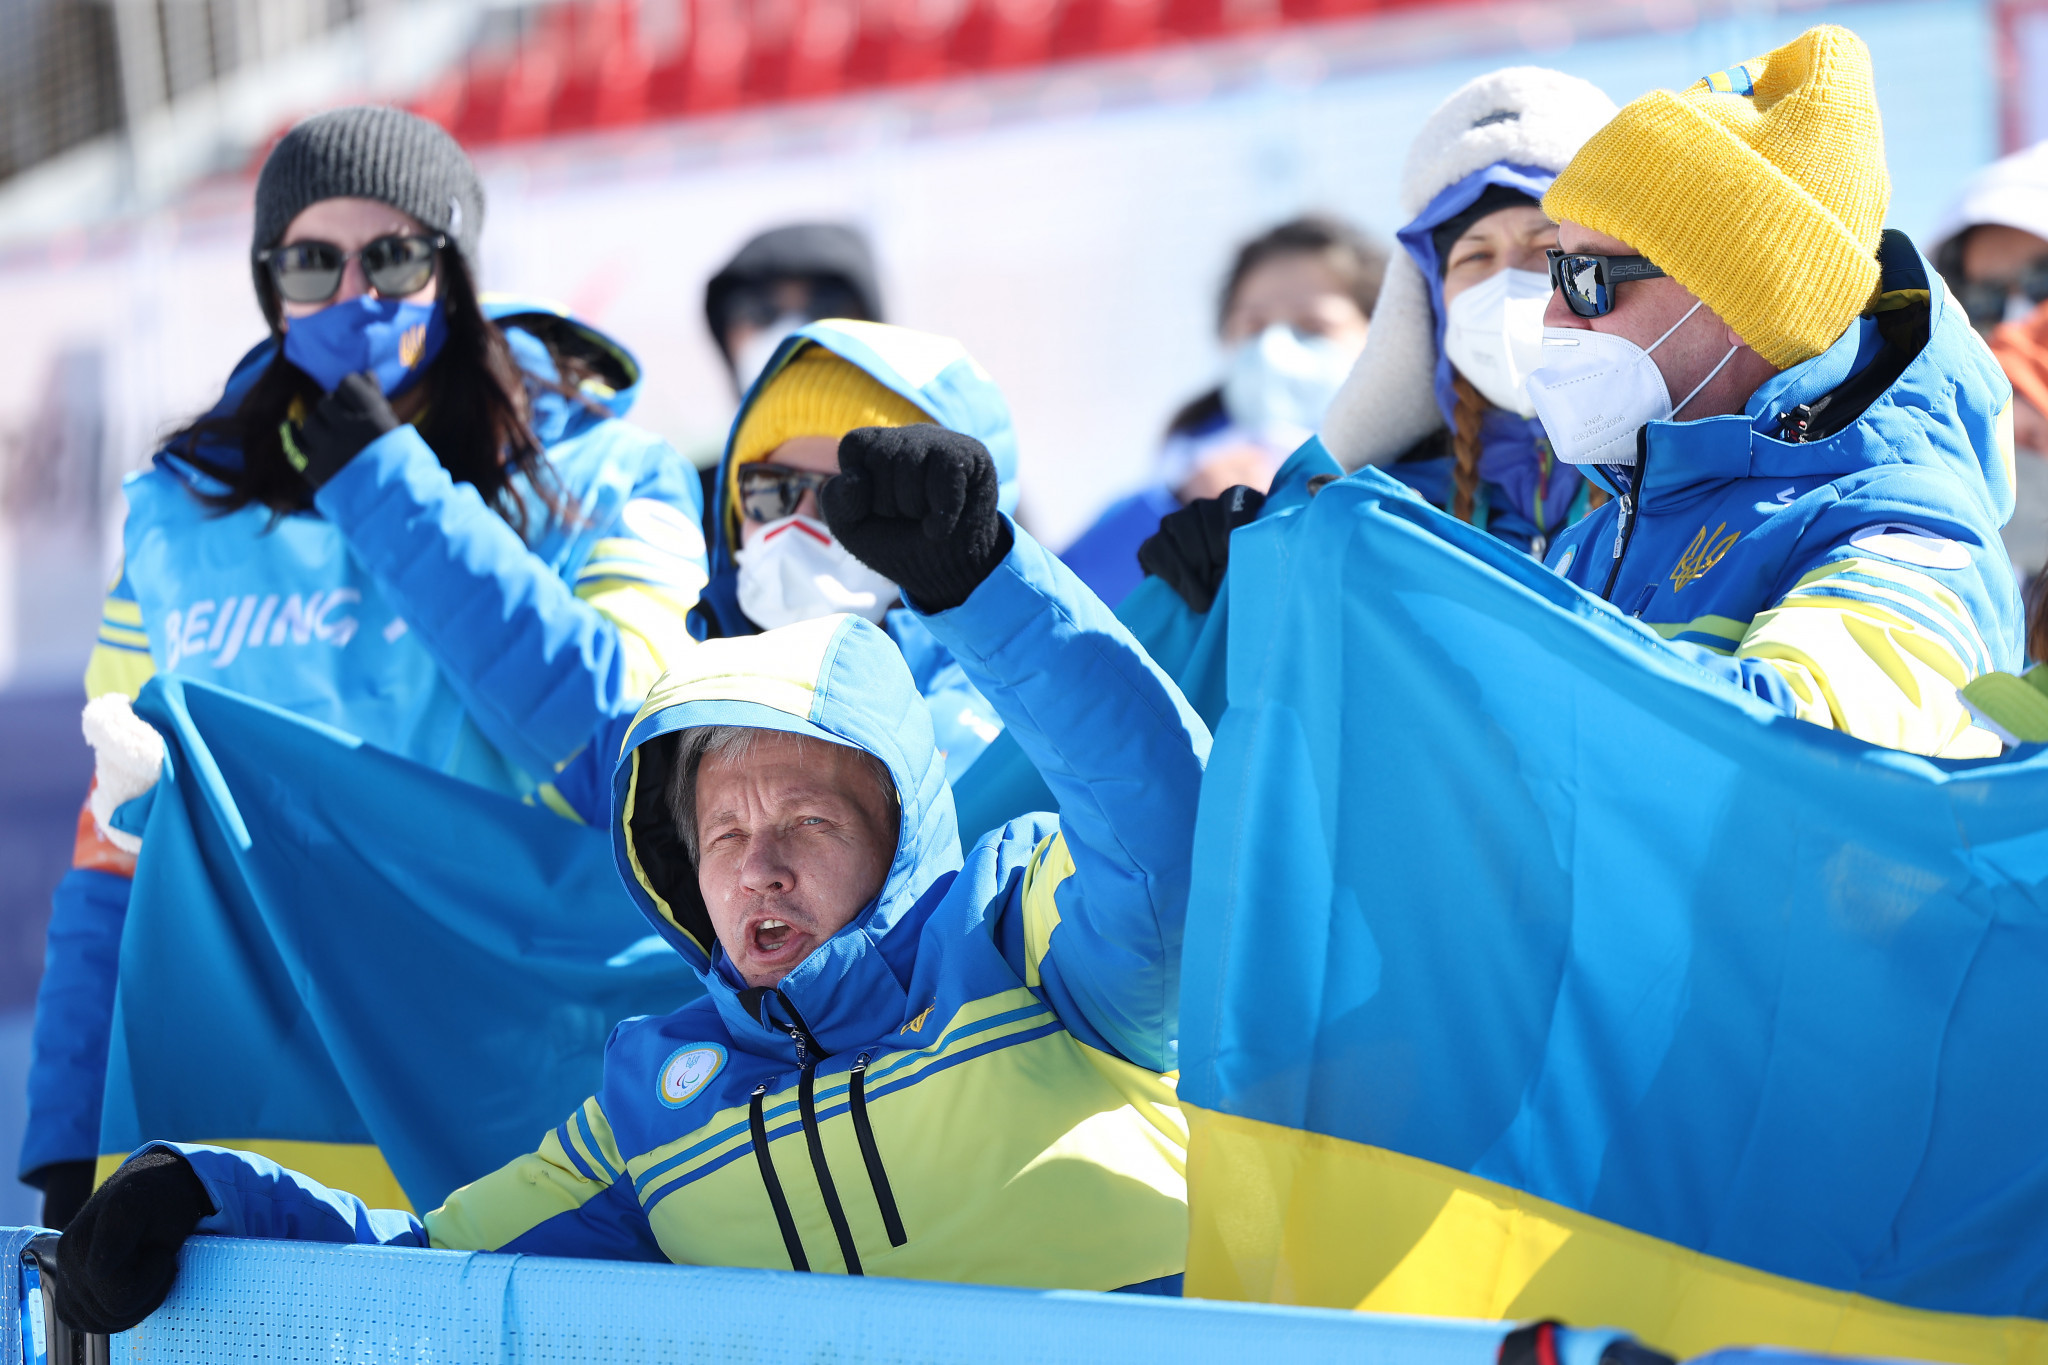 Ukraine's participation will be the major story of the Beijing 2022 Paralympic Games ©Getty Images